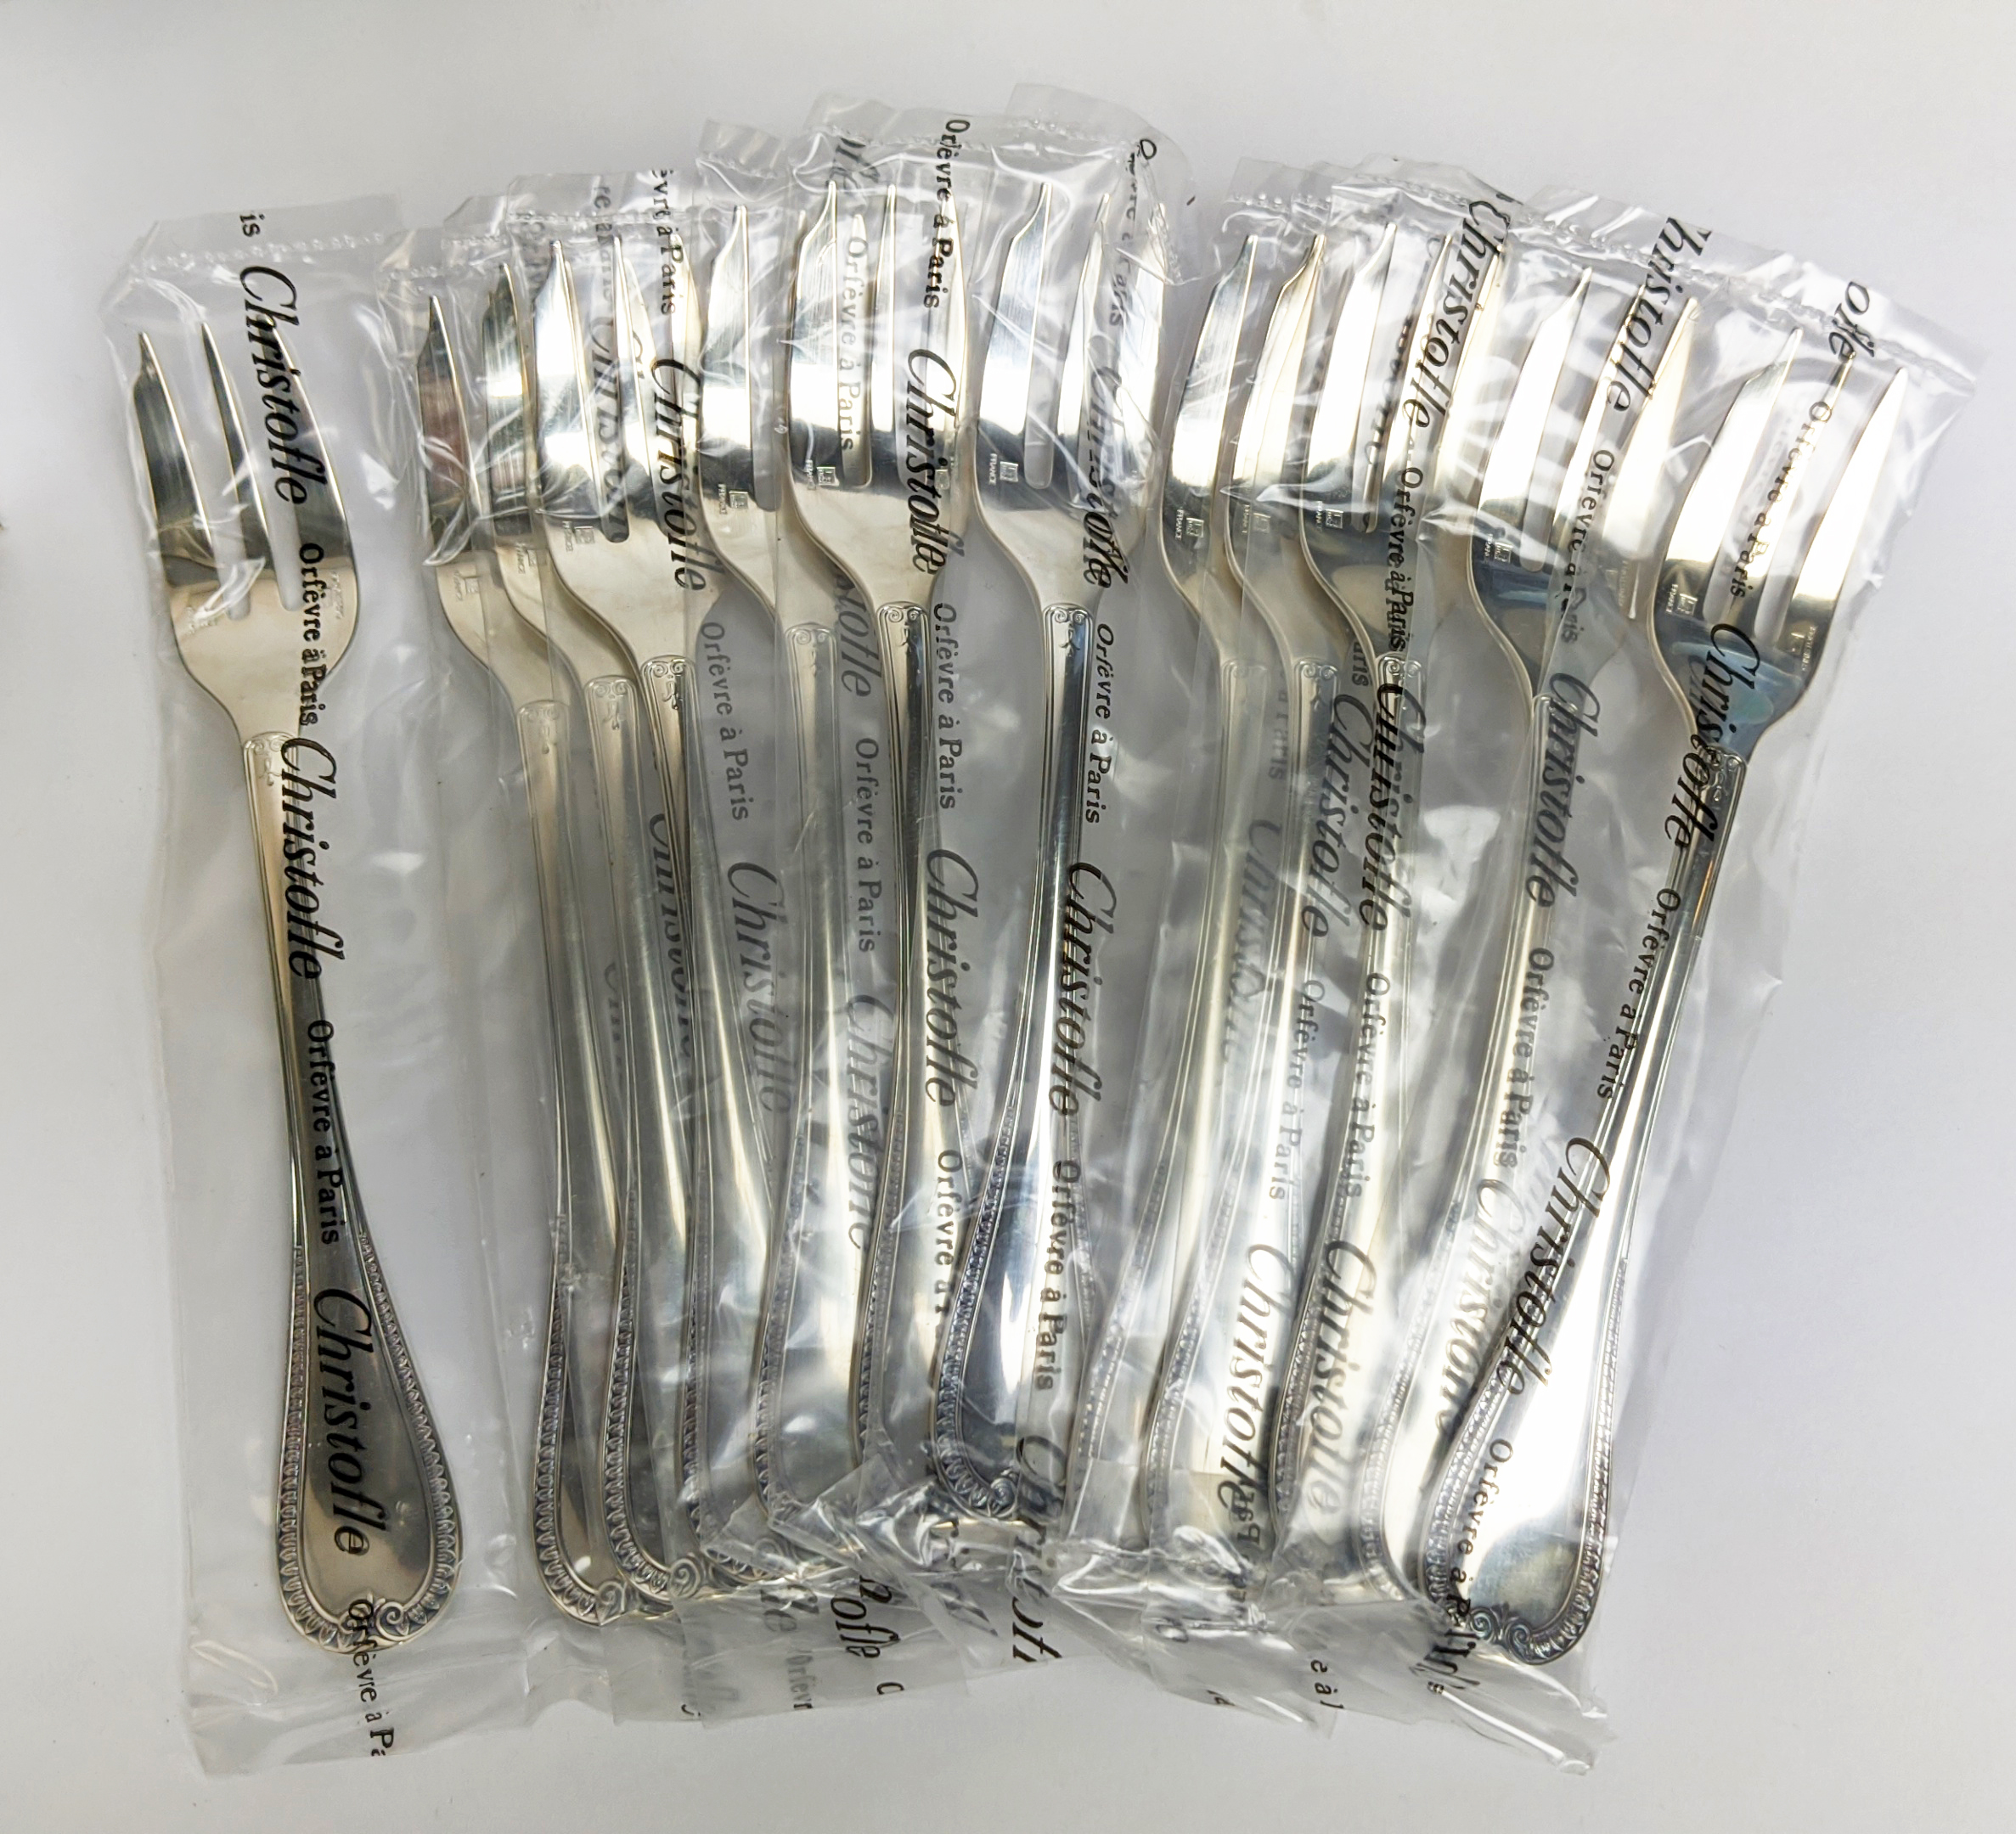 CHRISTOFLE COLLECTION OF CUTLERY, comprising 12 dinner knives, 12 dinner forks, 12 table spoons, - Image 2 of 19